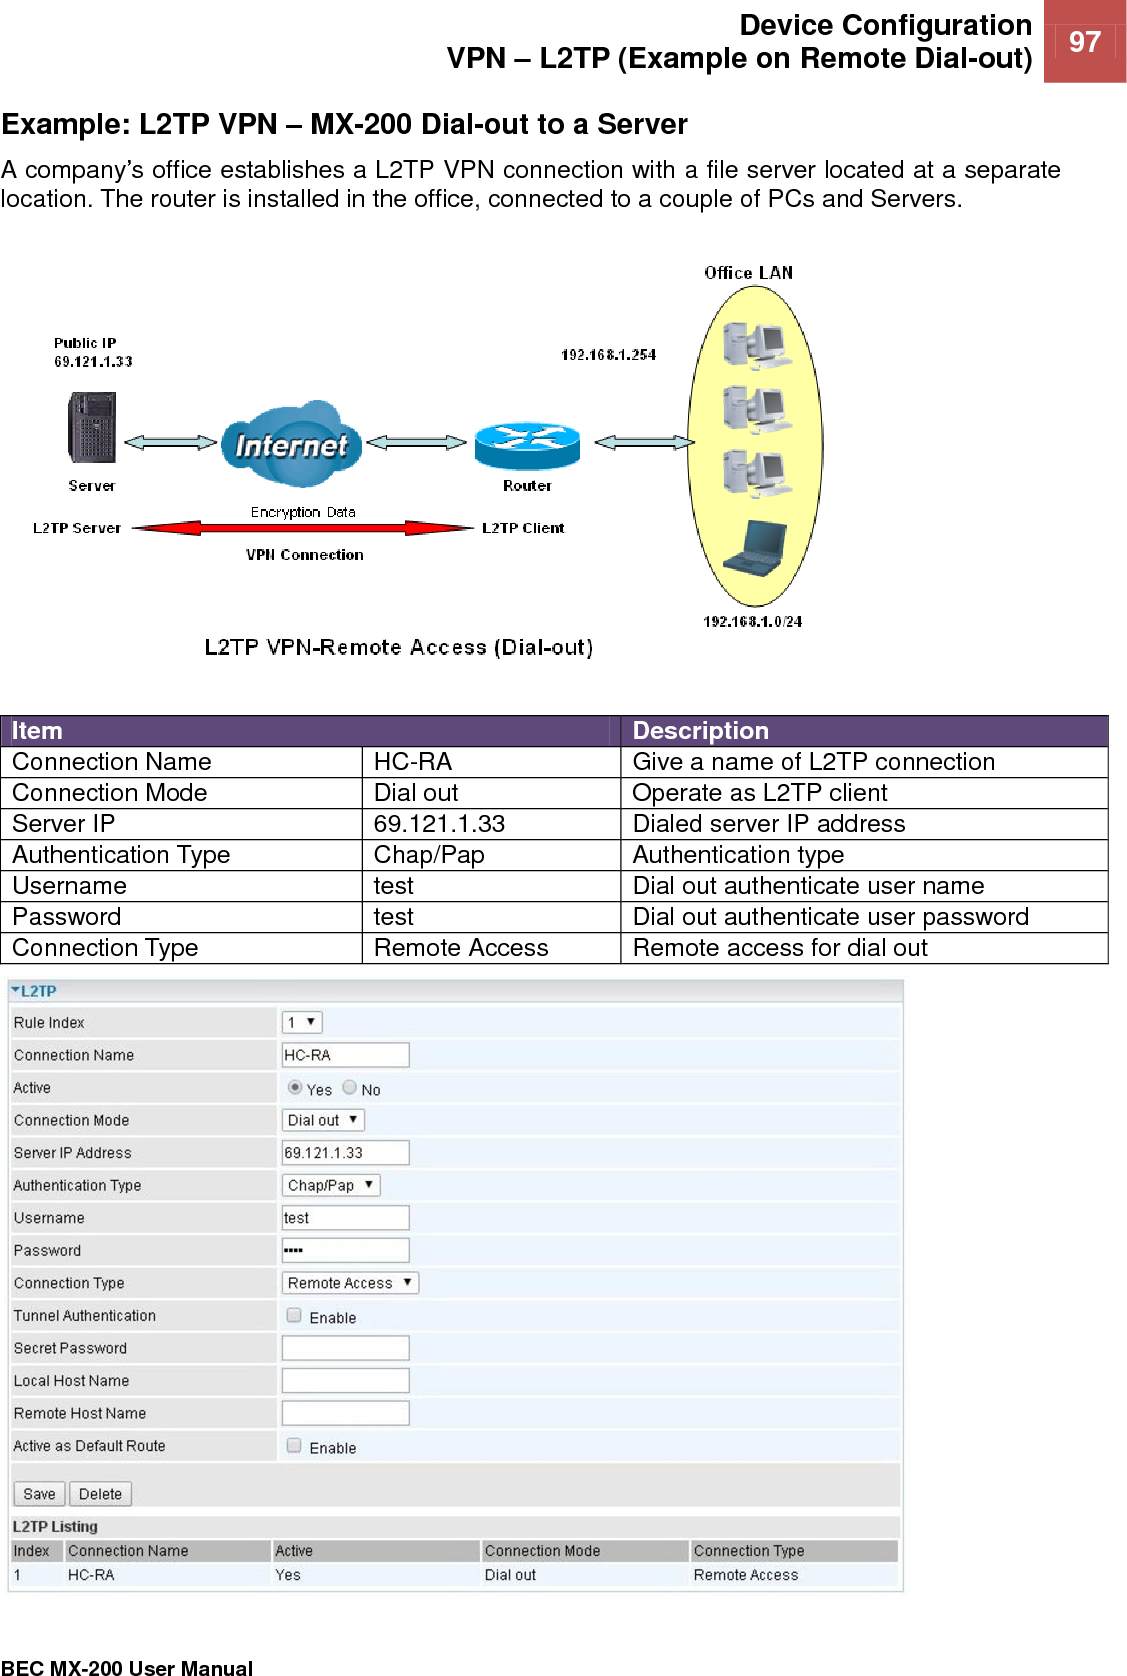  Device Configuration VPN – L2TP (Example on Remote Dial-out) 97   BEC MX-200 User Manual  Example: L2TP VPN – MX-200 Dial-out to a Server  A company’s office establishes a L2TP VPN connection with a file server located at a separate location. The router is installed in the office, connected to a couple of PCs and Servers.   Item Description Connection Name HC-RA Give a name of L2TP connection Connection Mode Dial out Operate as L2TP client Server IP 69.121.1.33 Dialed server IP address Authentication Type Chap/Pap Authentication type Username test Dial out authenticate user name Password test Dial out authenticate user password Connection Type Remote Access Remote access for dial out 